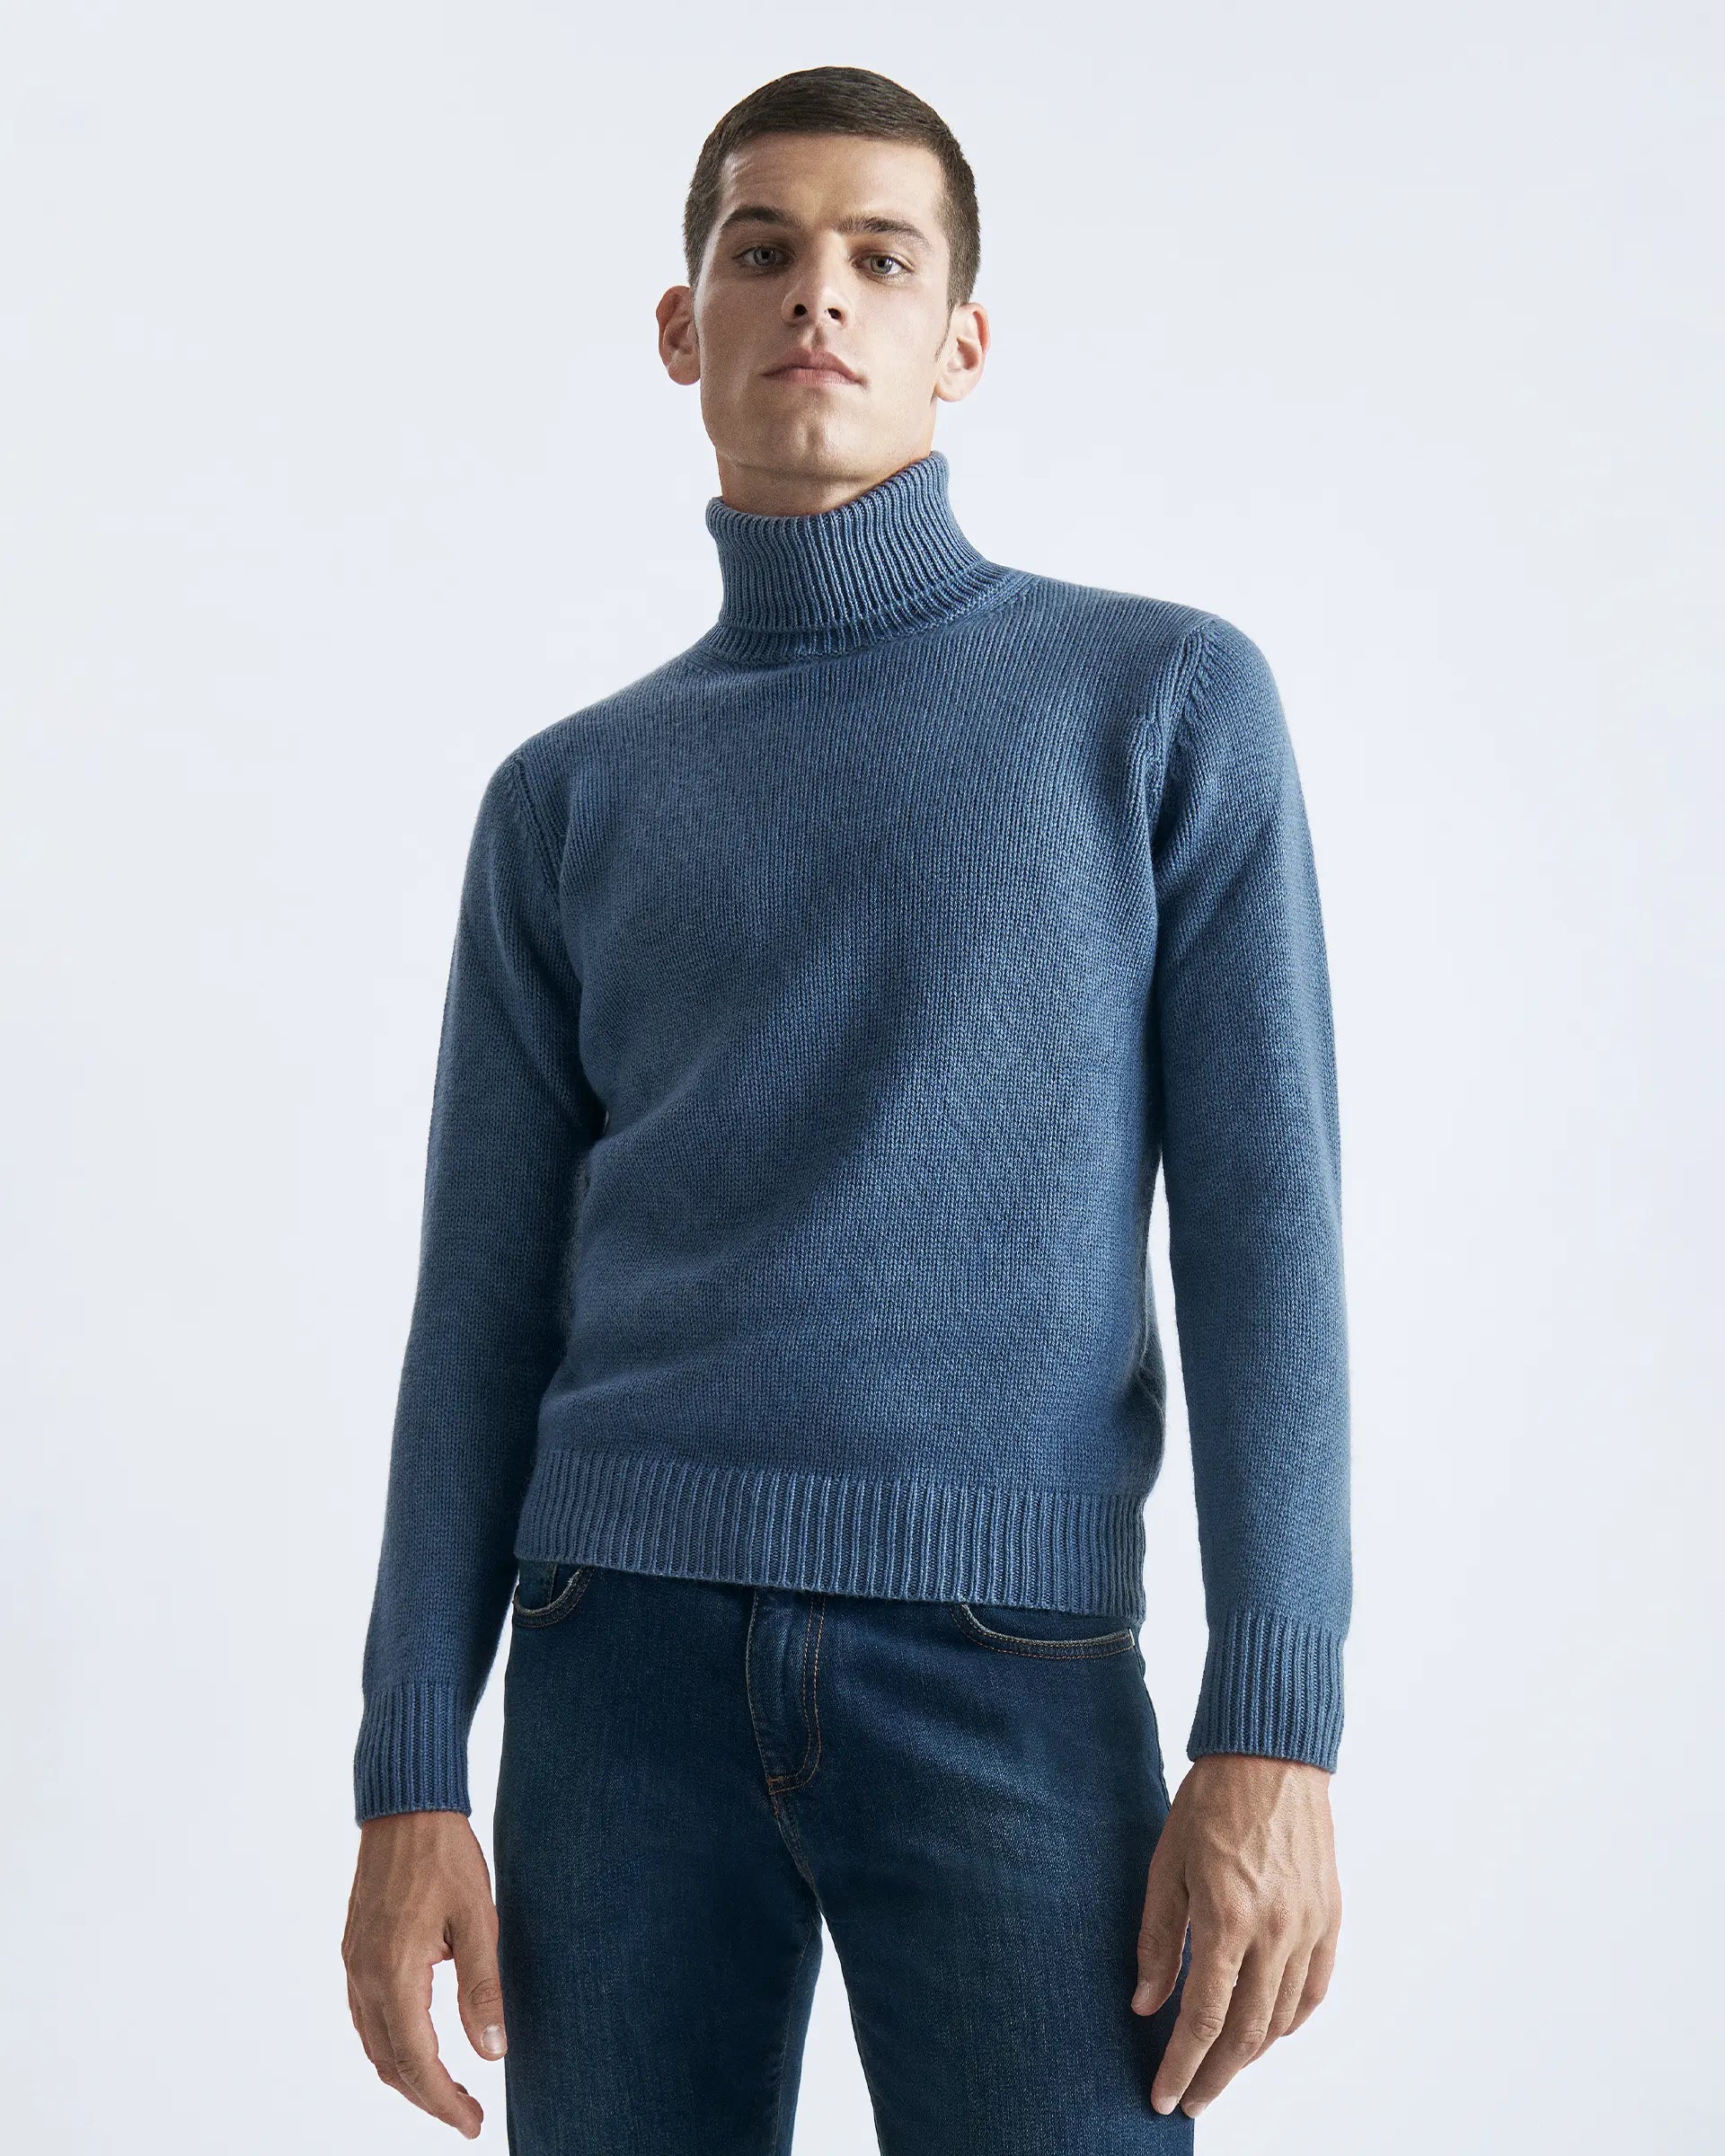 Blue Turtleneck in wool silk and cashmere